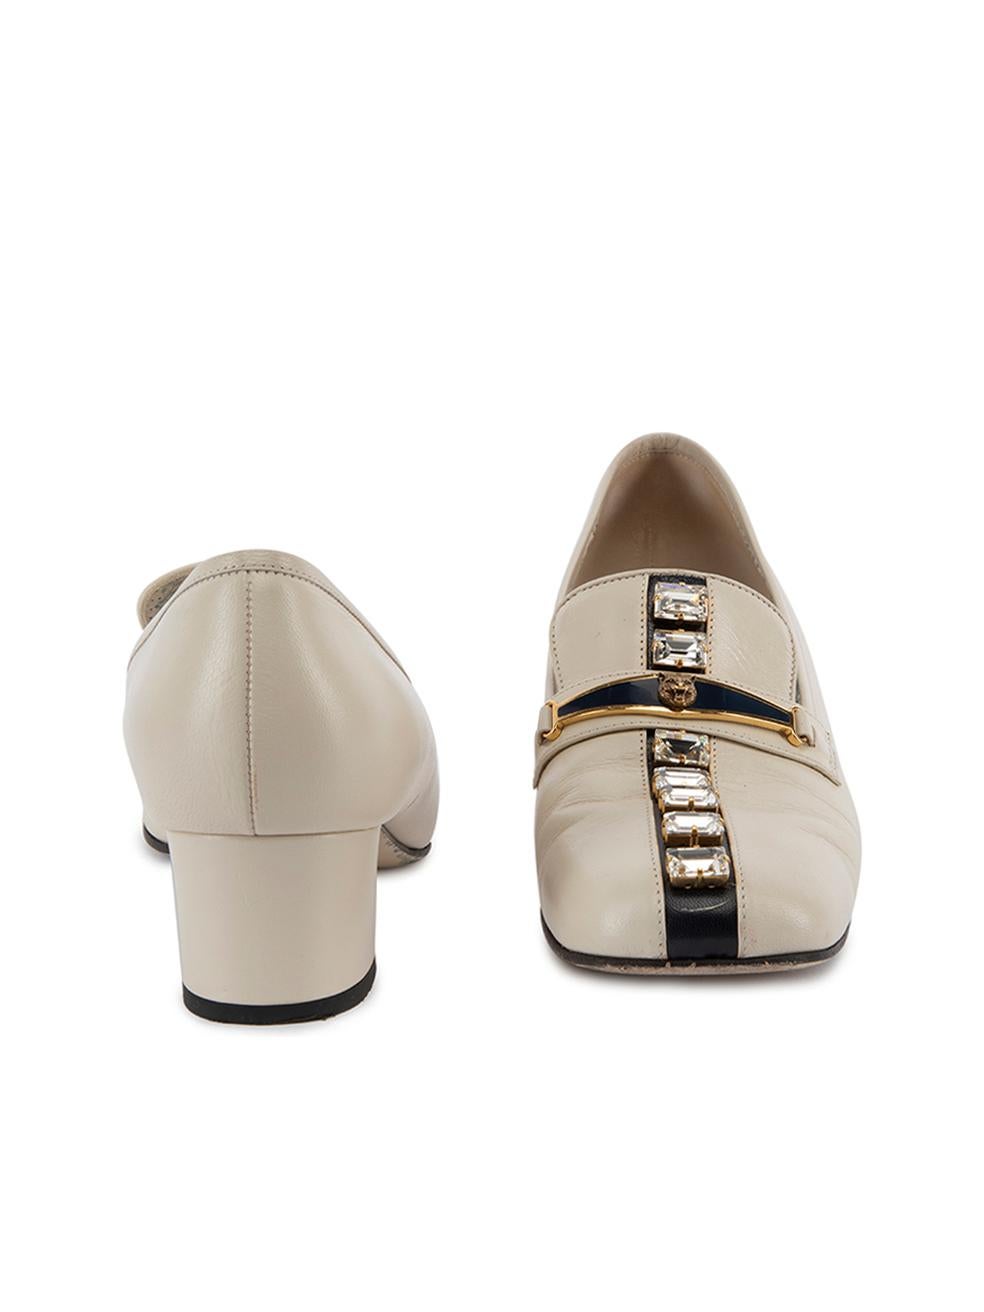 Pre-Loved Gucci Women's Cream Ginger Embellished Leather Loafer Pumps In Excellent Condition In London, GB